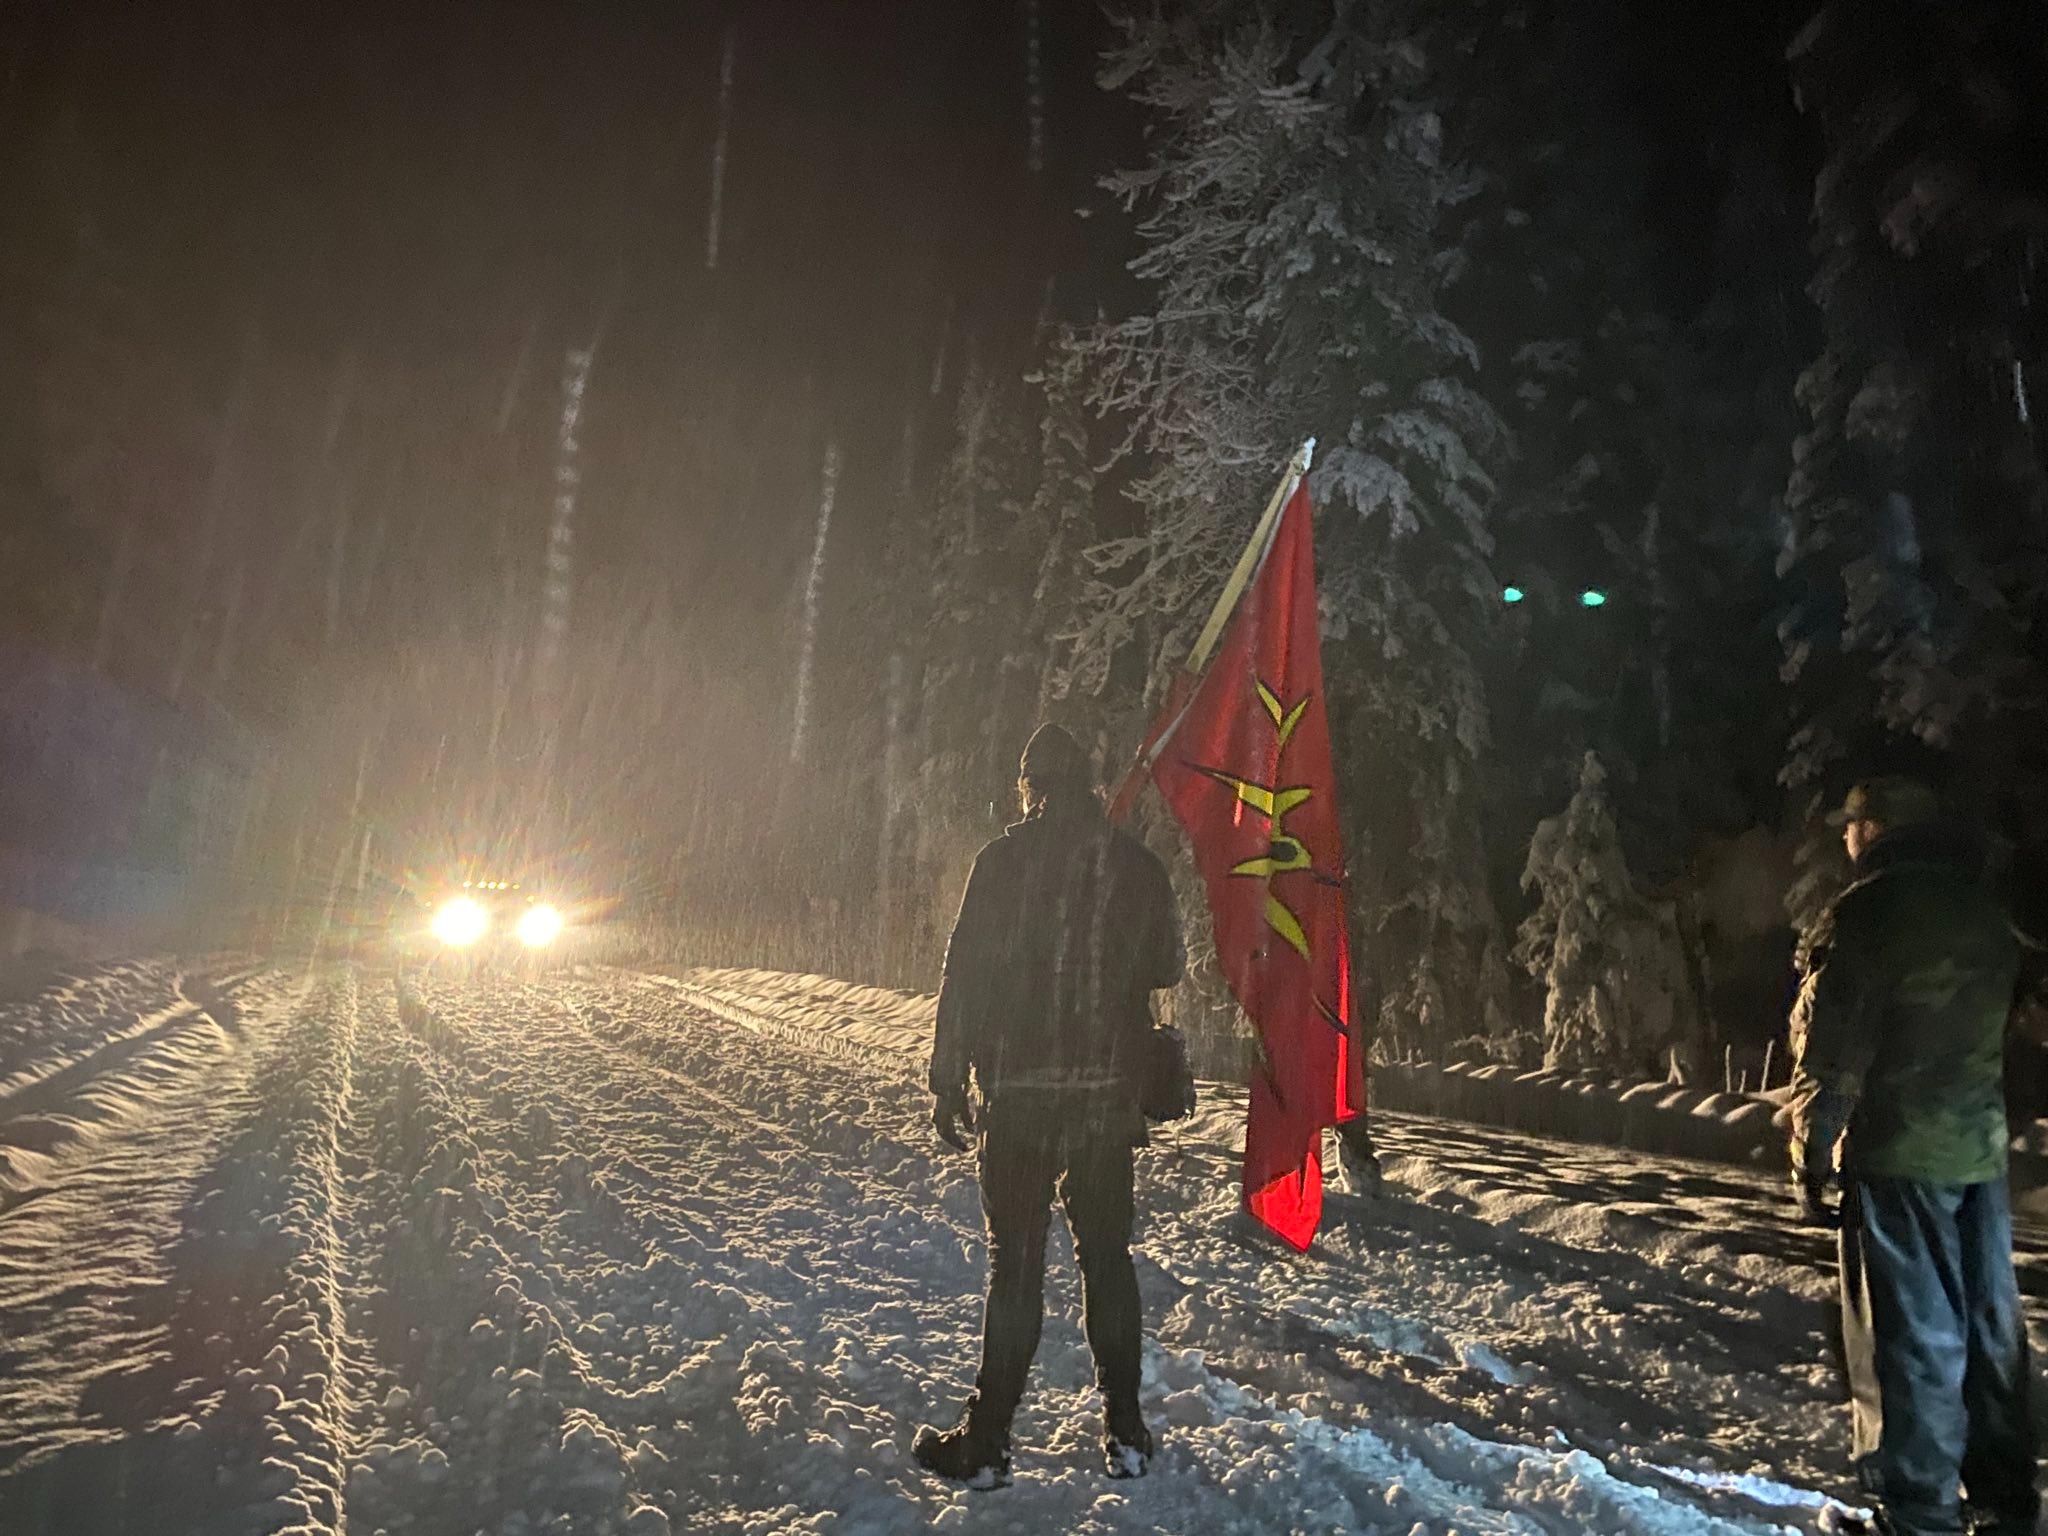 To Settlers, by Settlers: A Callout for Rail Disruptions in Solidarity with the Wet’suwet’en